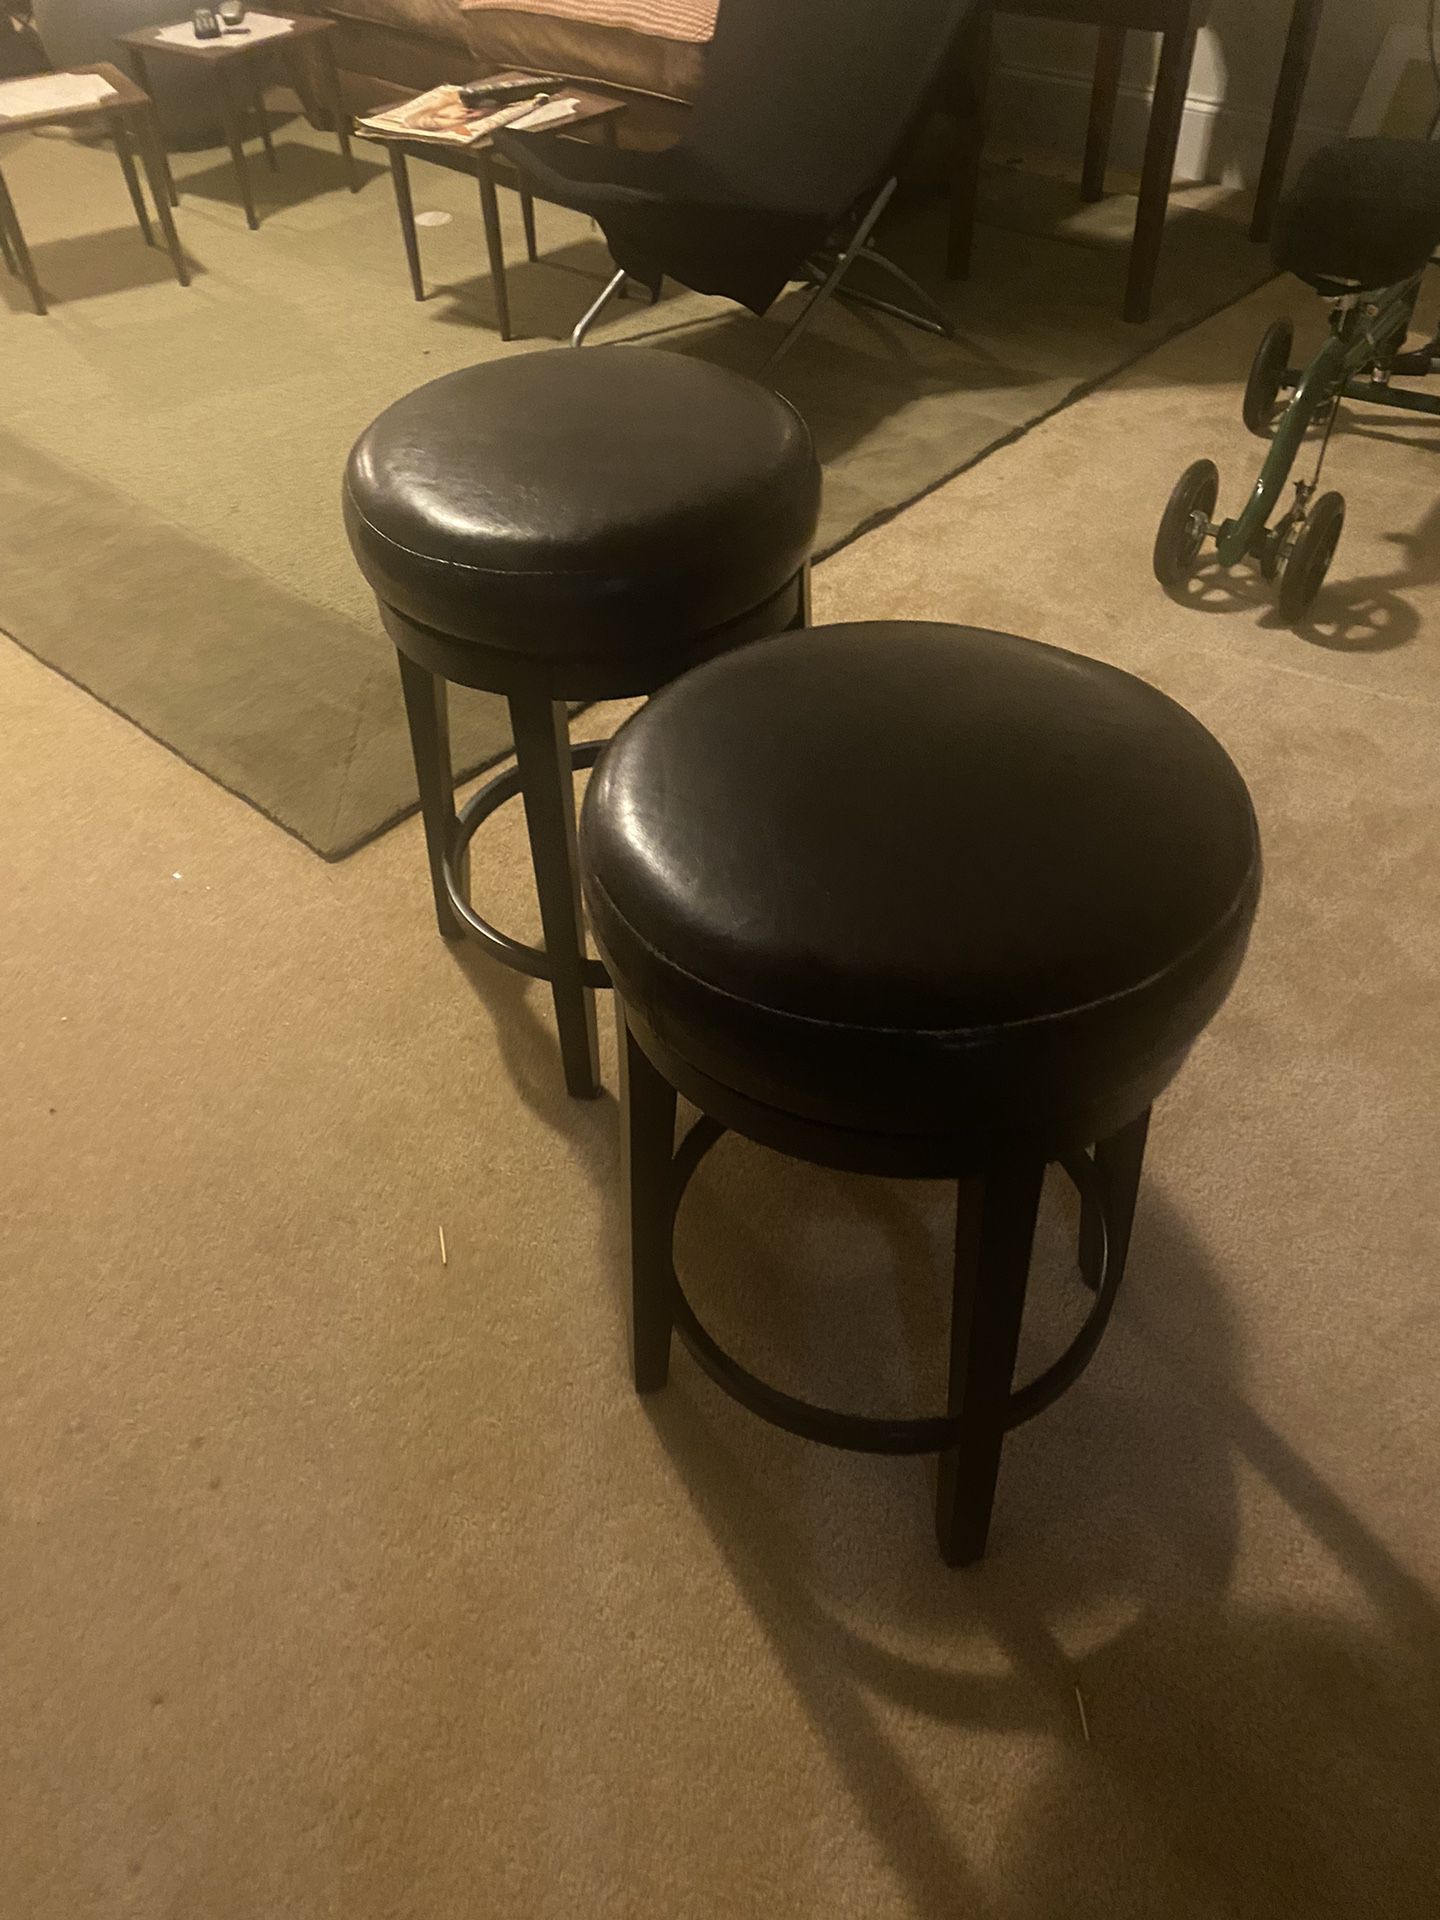 24 inch barstools $27each two outdoor rocking chairs 30 each Art 55H Mirrors 60 Both